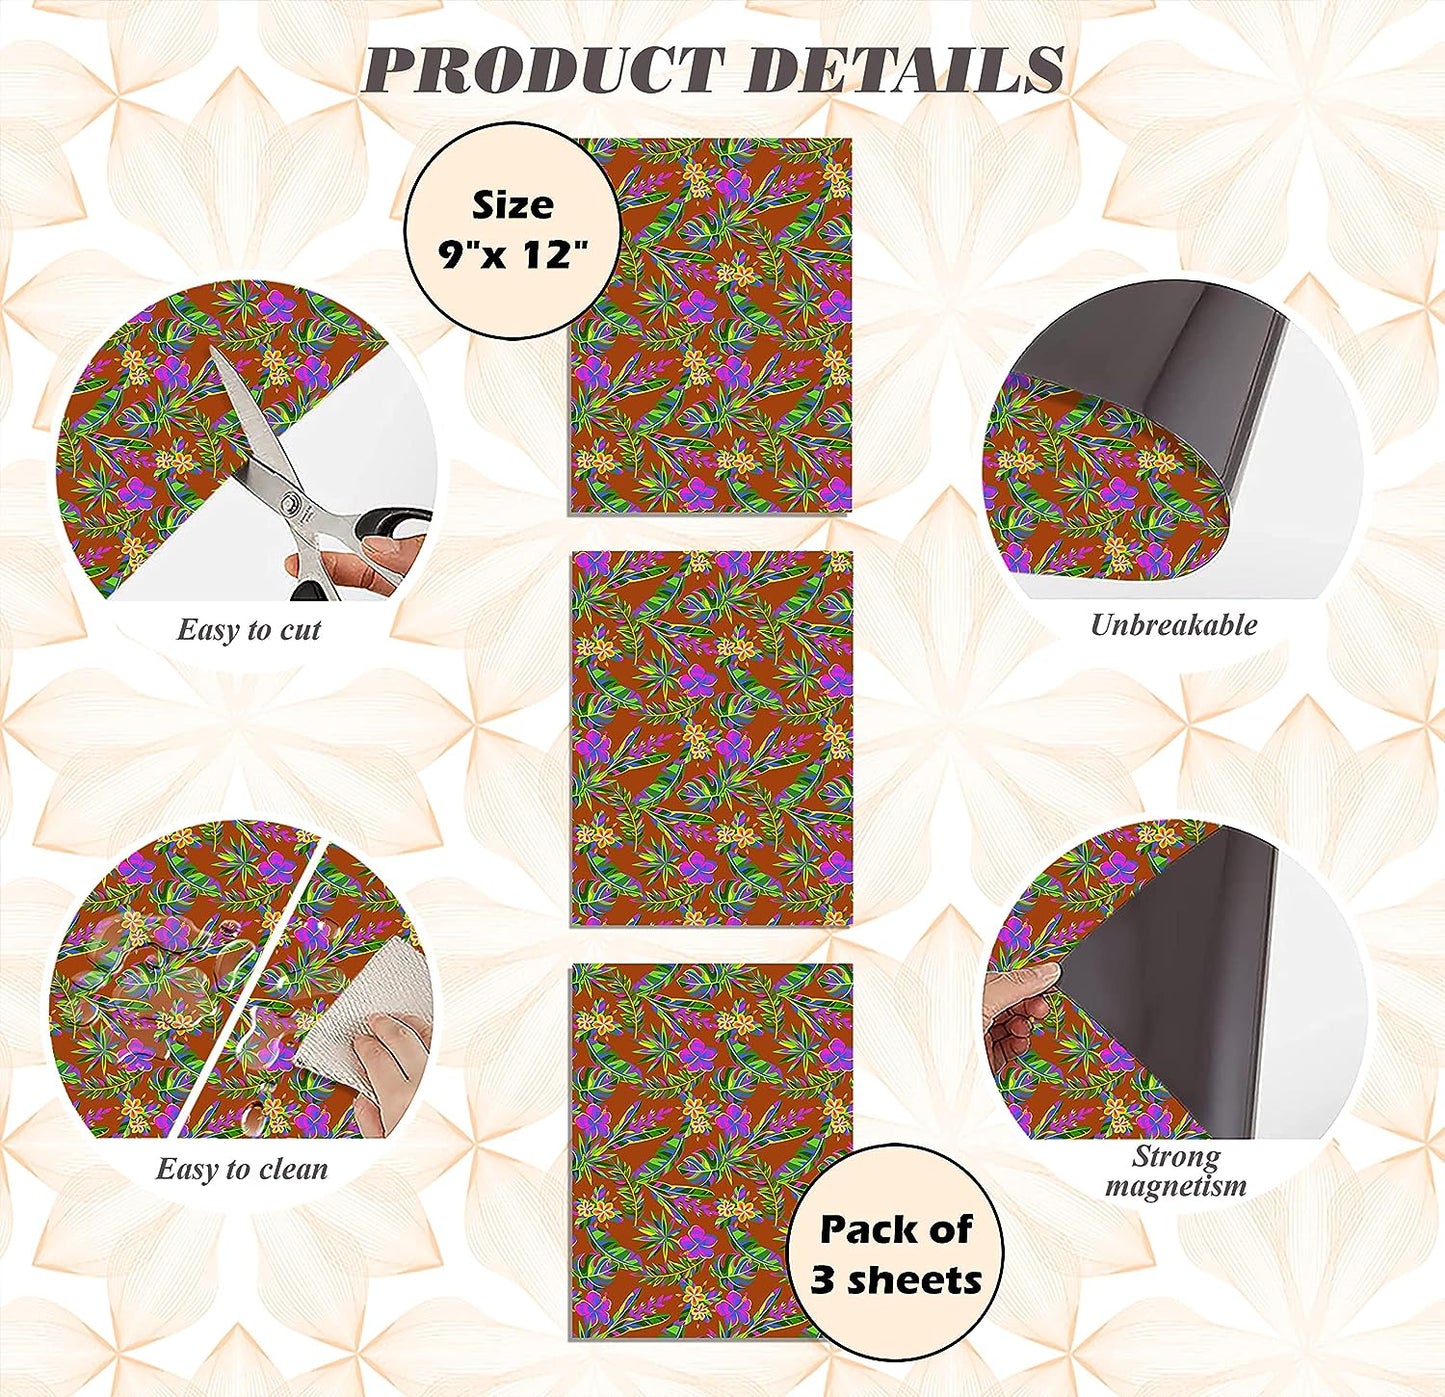 PELICAN INDUSTRIAL Magnetic Locker Wallpaper (Full Sheet Magnetic) - Remove & Reuse Decorative Vinyl - Made in USA - Fade, Tear and Water Resistant - (Tropical Leaves) - Pack of 3 Sheets (vb054)